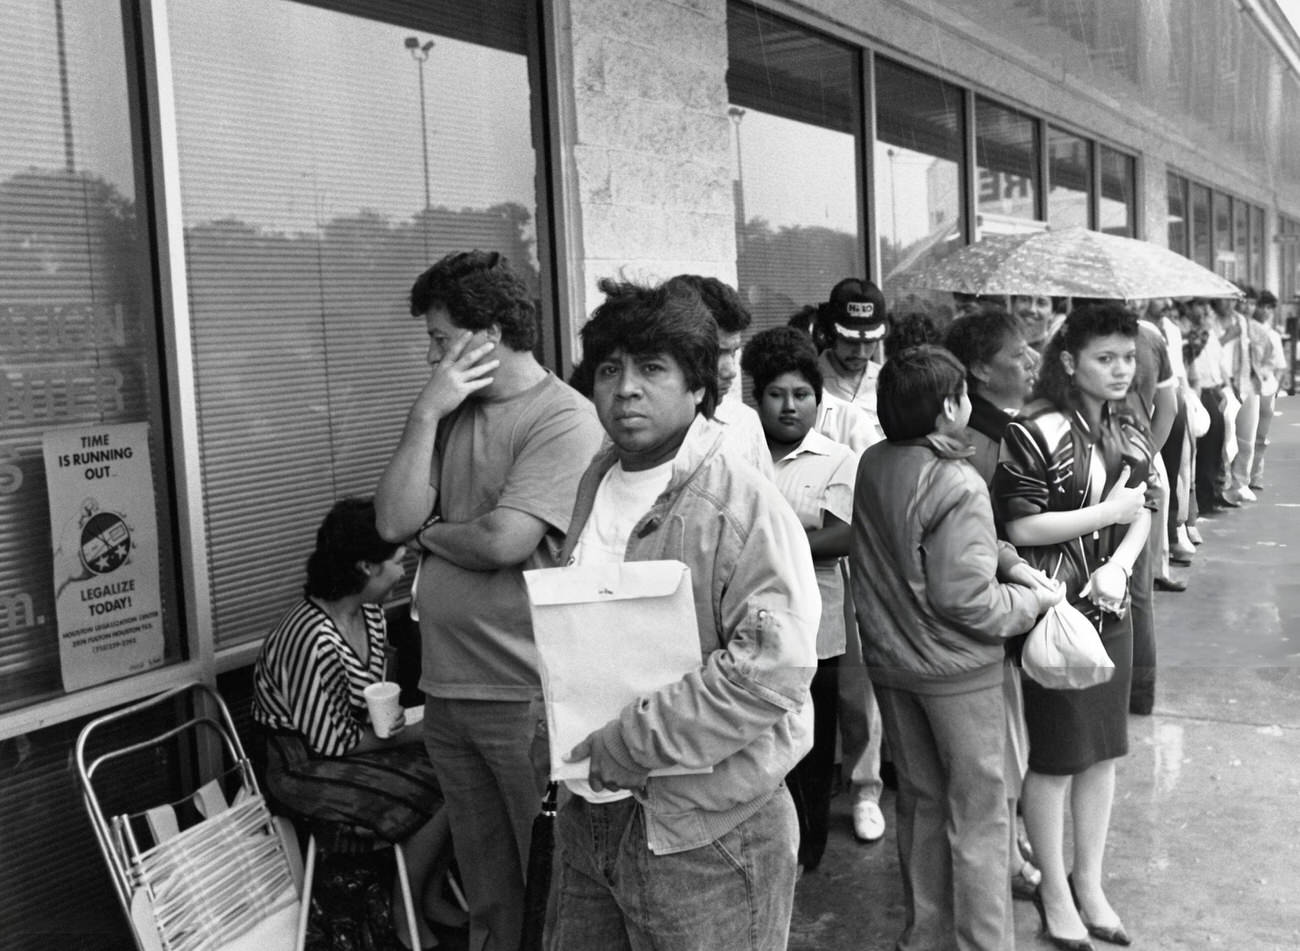 U.S. citizens wait in the rain outside the Immigration and Naturalisation Service, Houston, Texas, April 29, 1988.